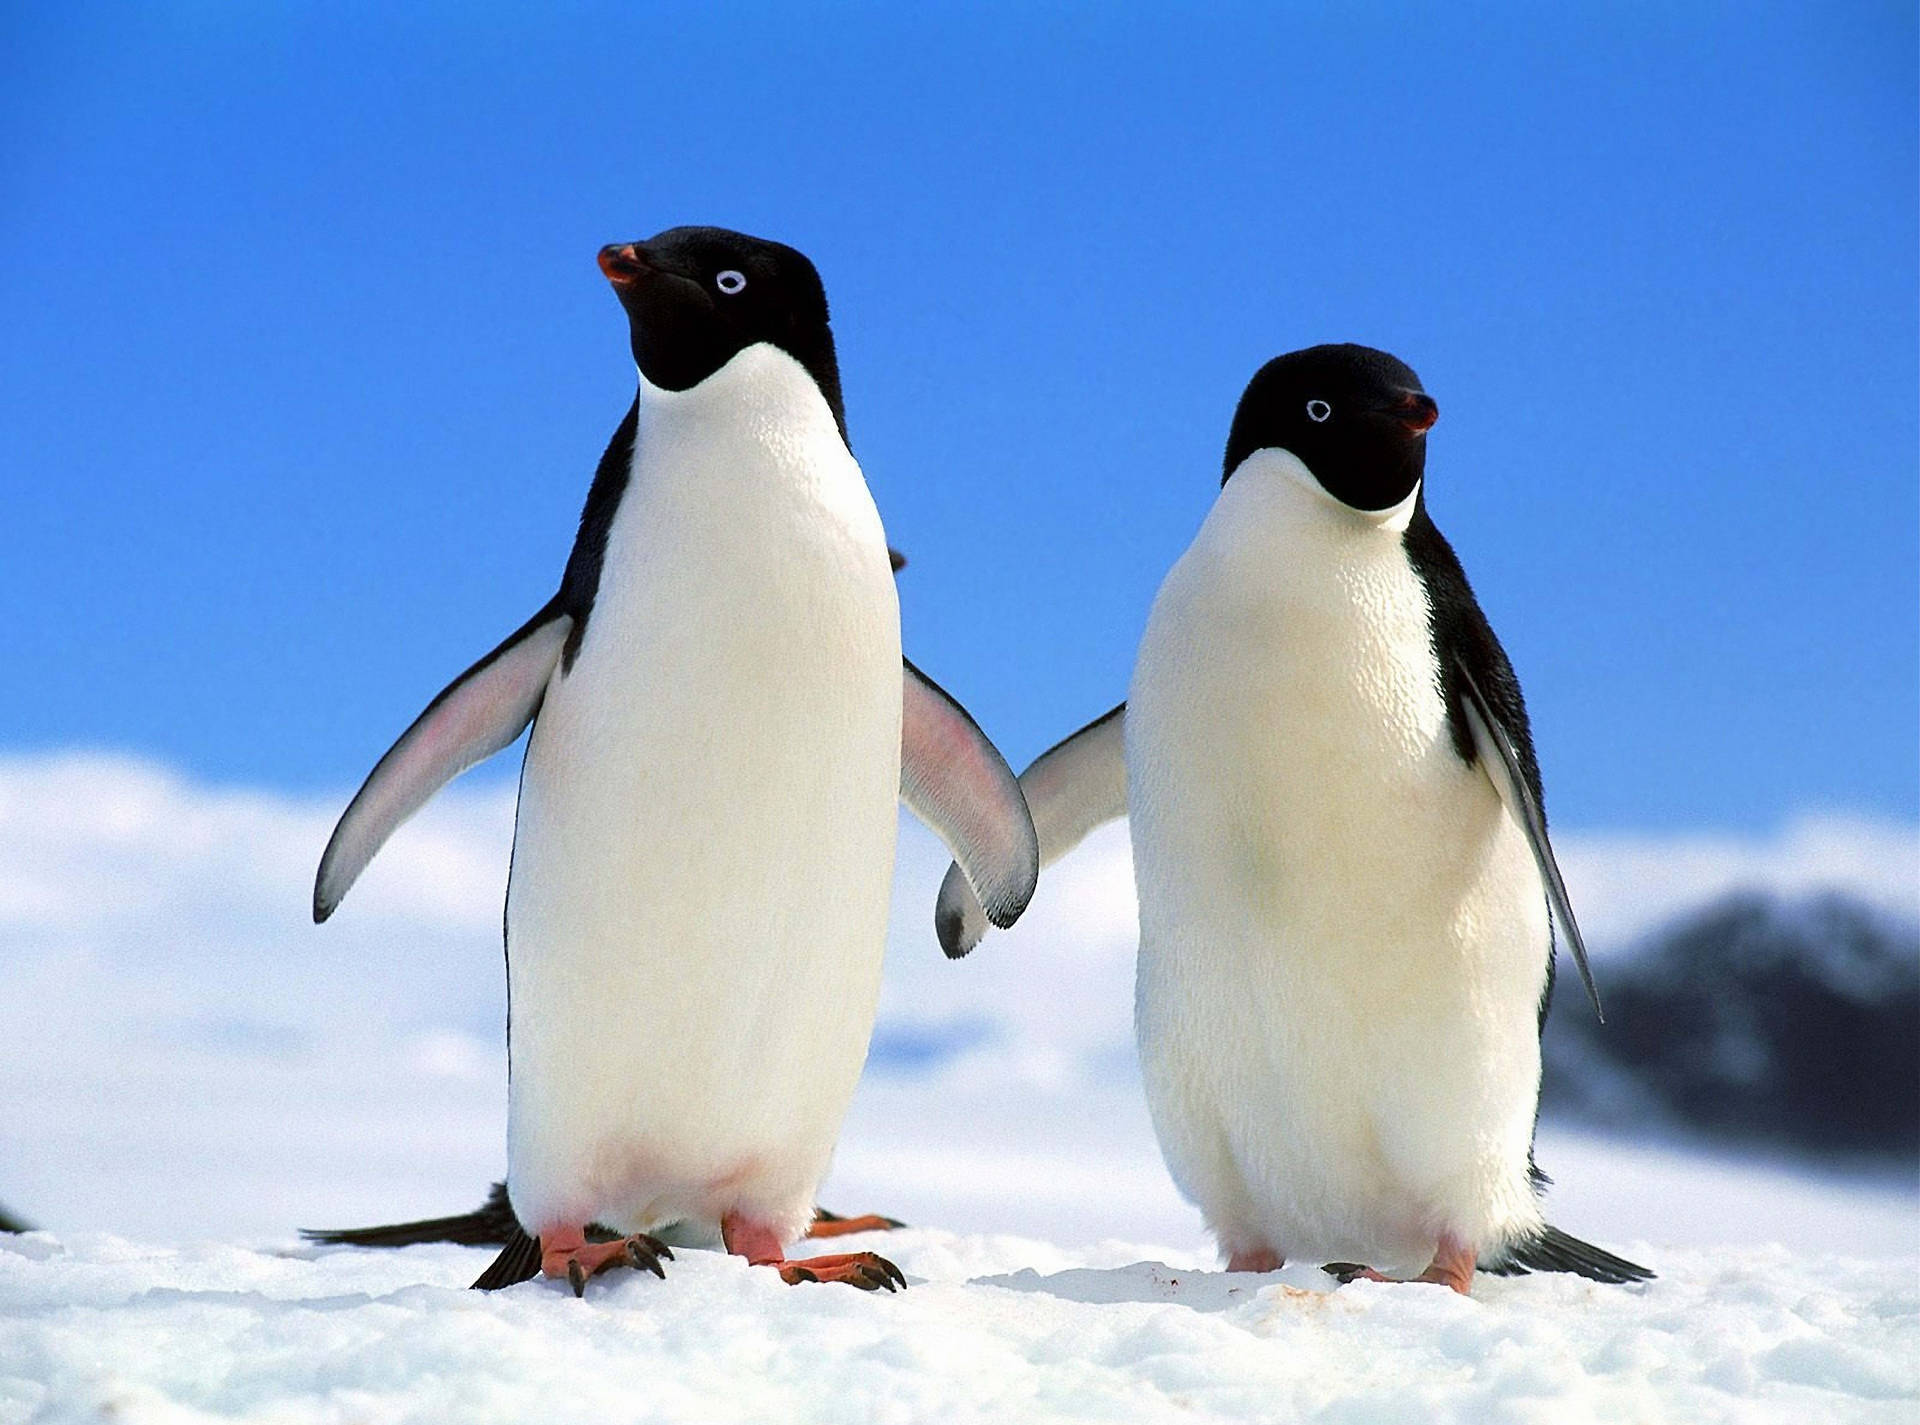 Two Penguins Holding Flippers